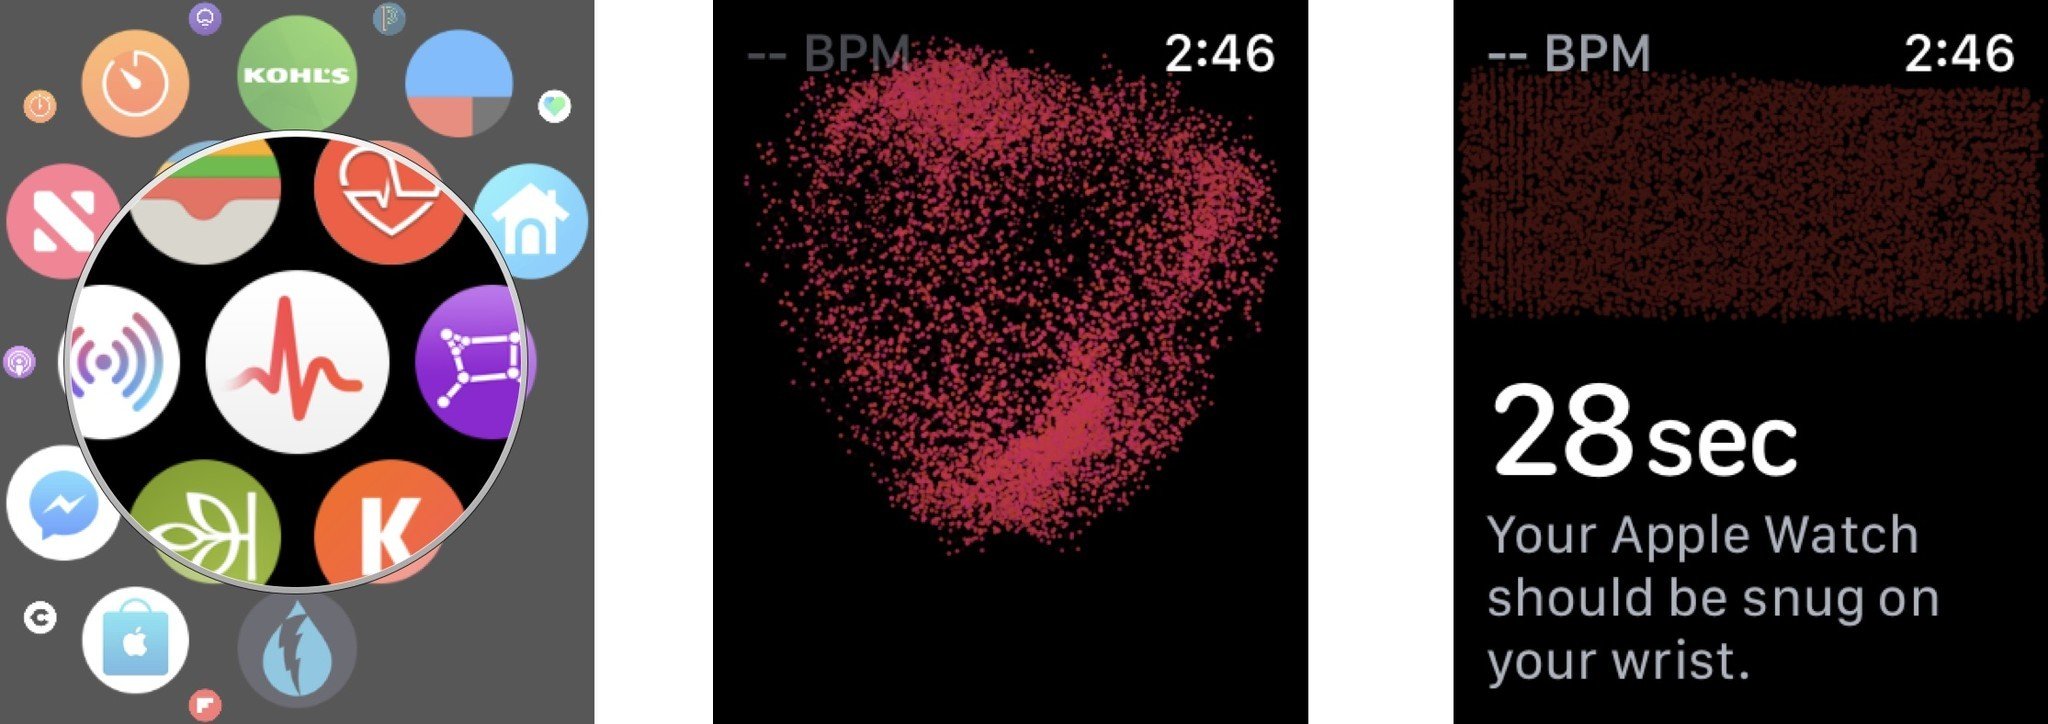 To use the ECG app on Apple Watch, push Digital Crown, tap ECG app, when you see the heart, hold your finger on the Digital Crown for 30 seconds until you see the measurement on the screen.